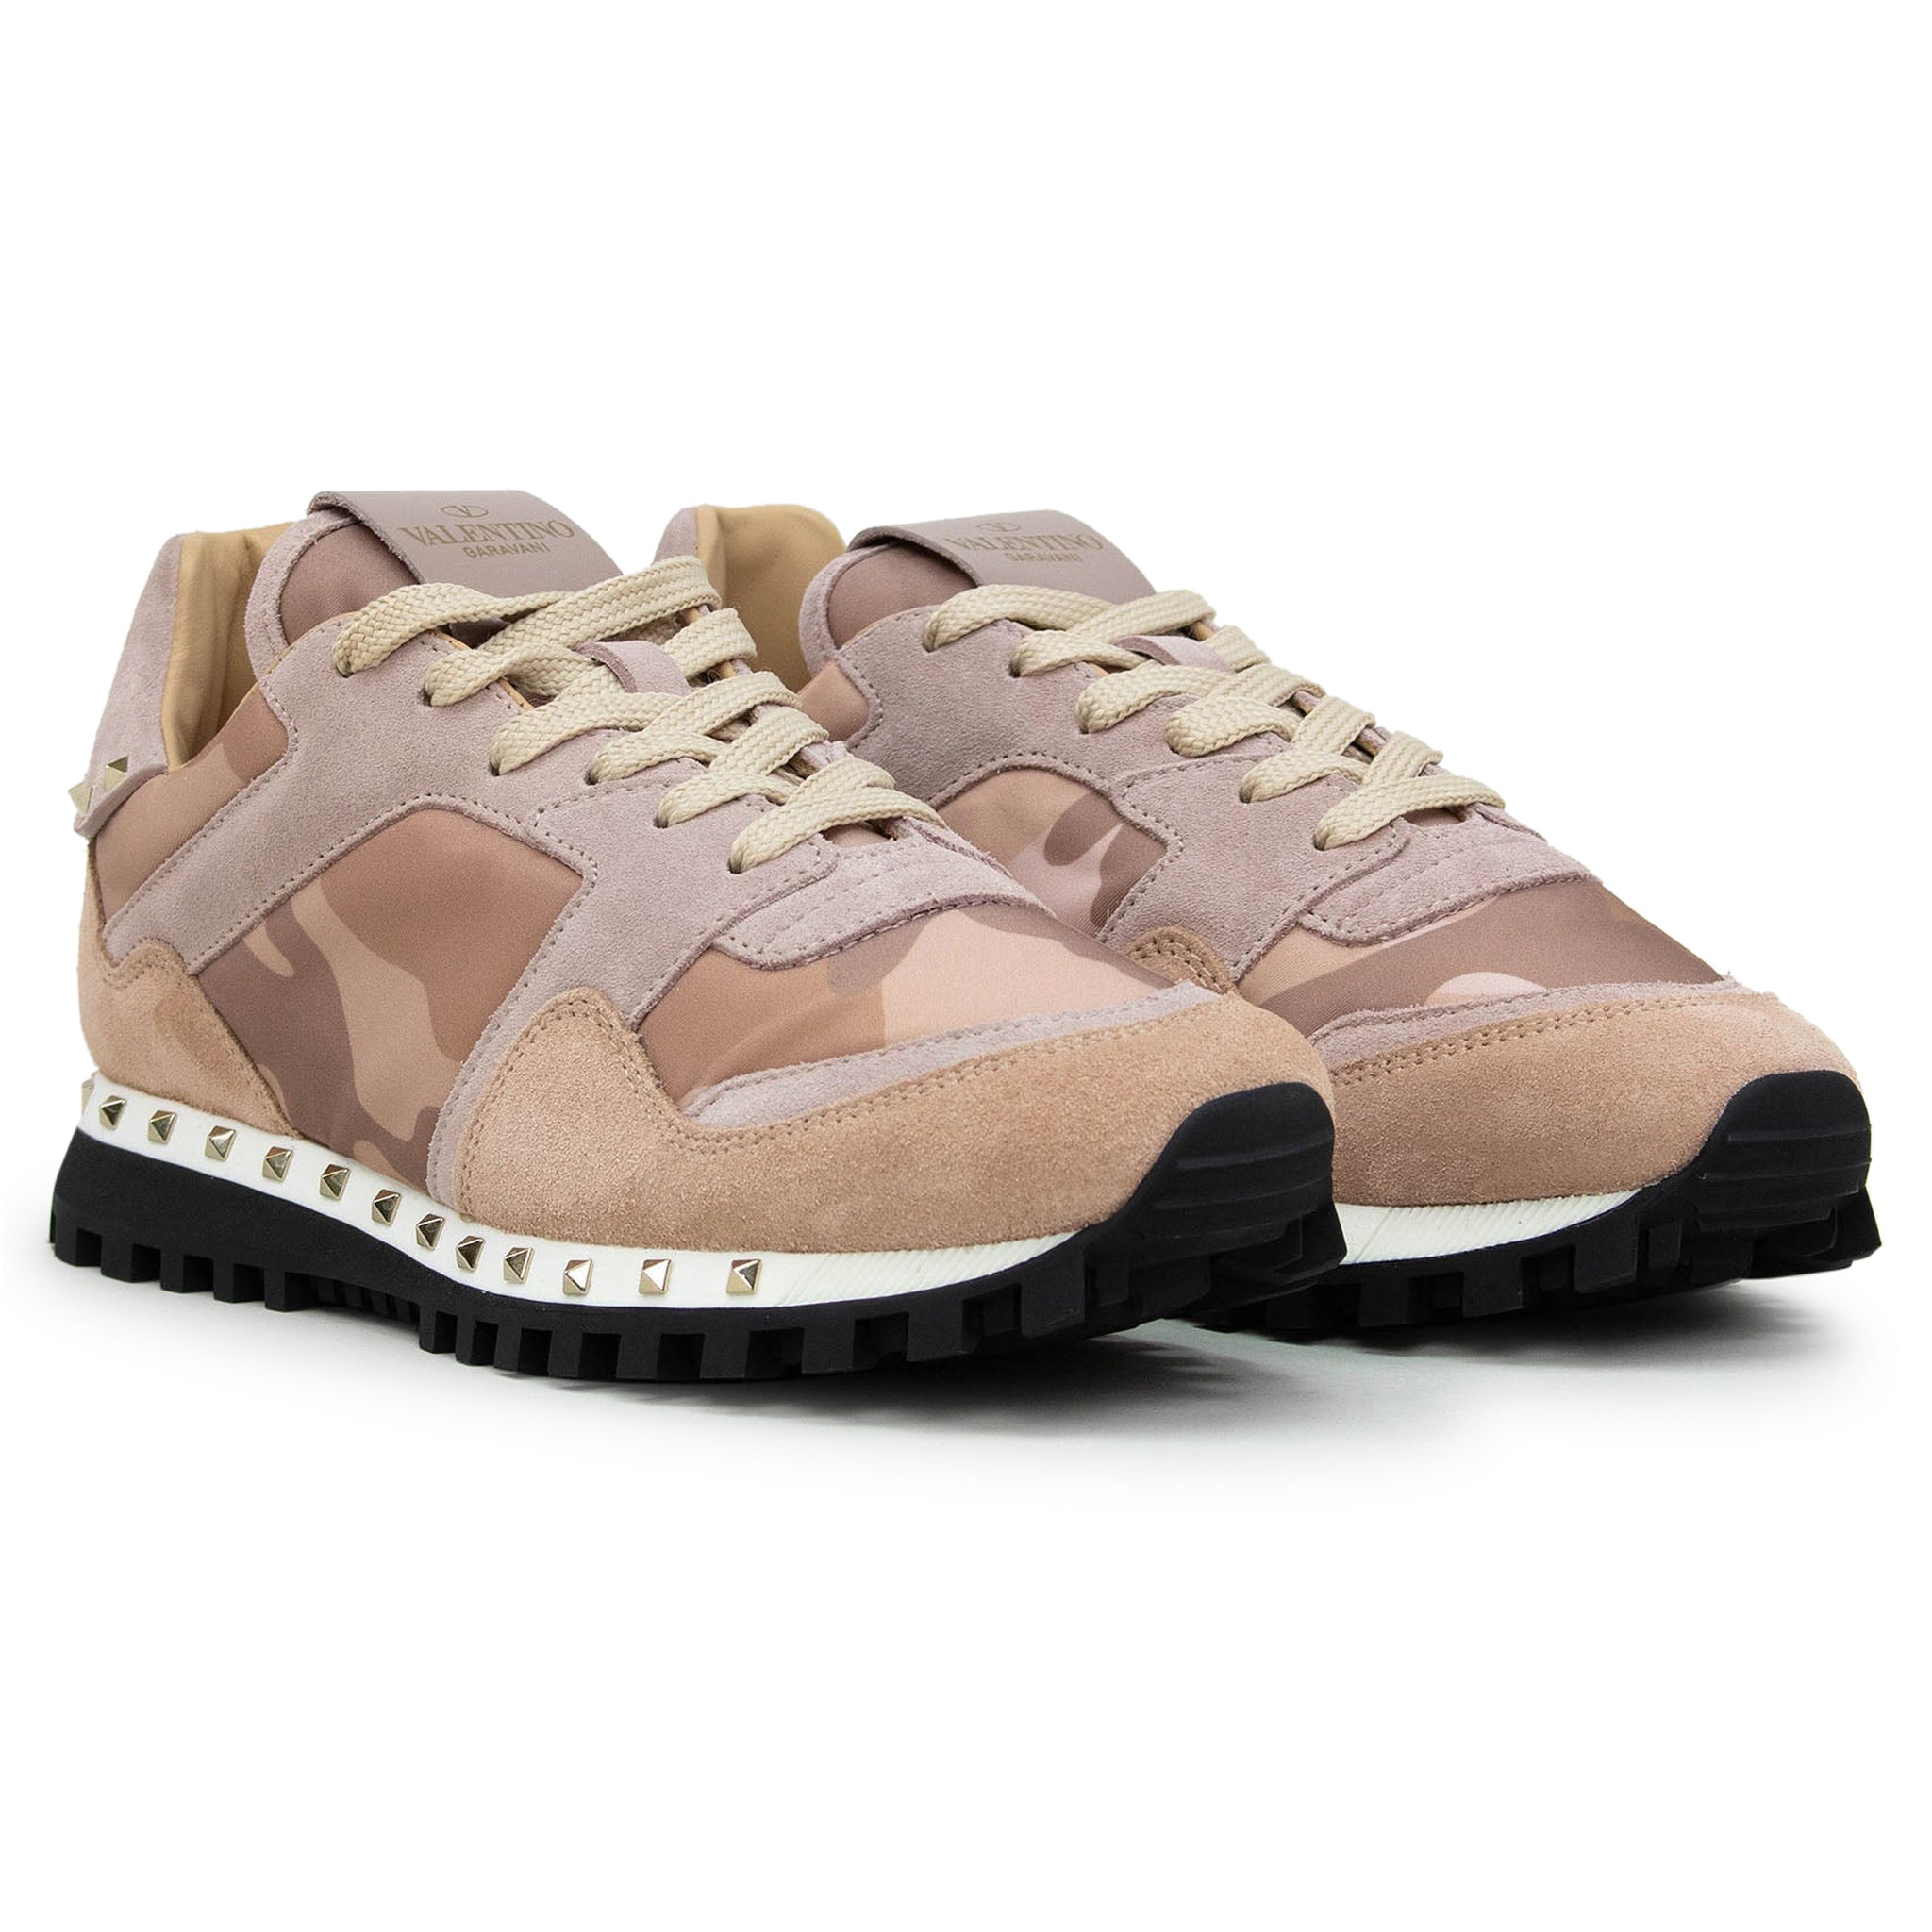 Valentino just bc Fendi and Karl get away with it doesnt mean you can too Cheap Hotelomega outlet | Valentino Rockstud Sneaker Pink